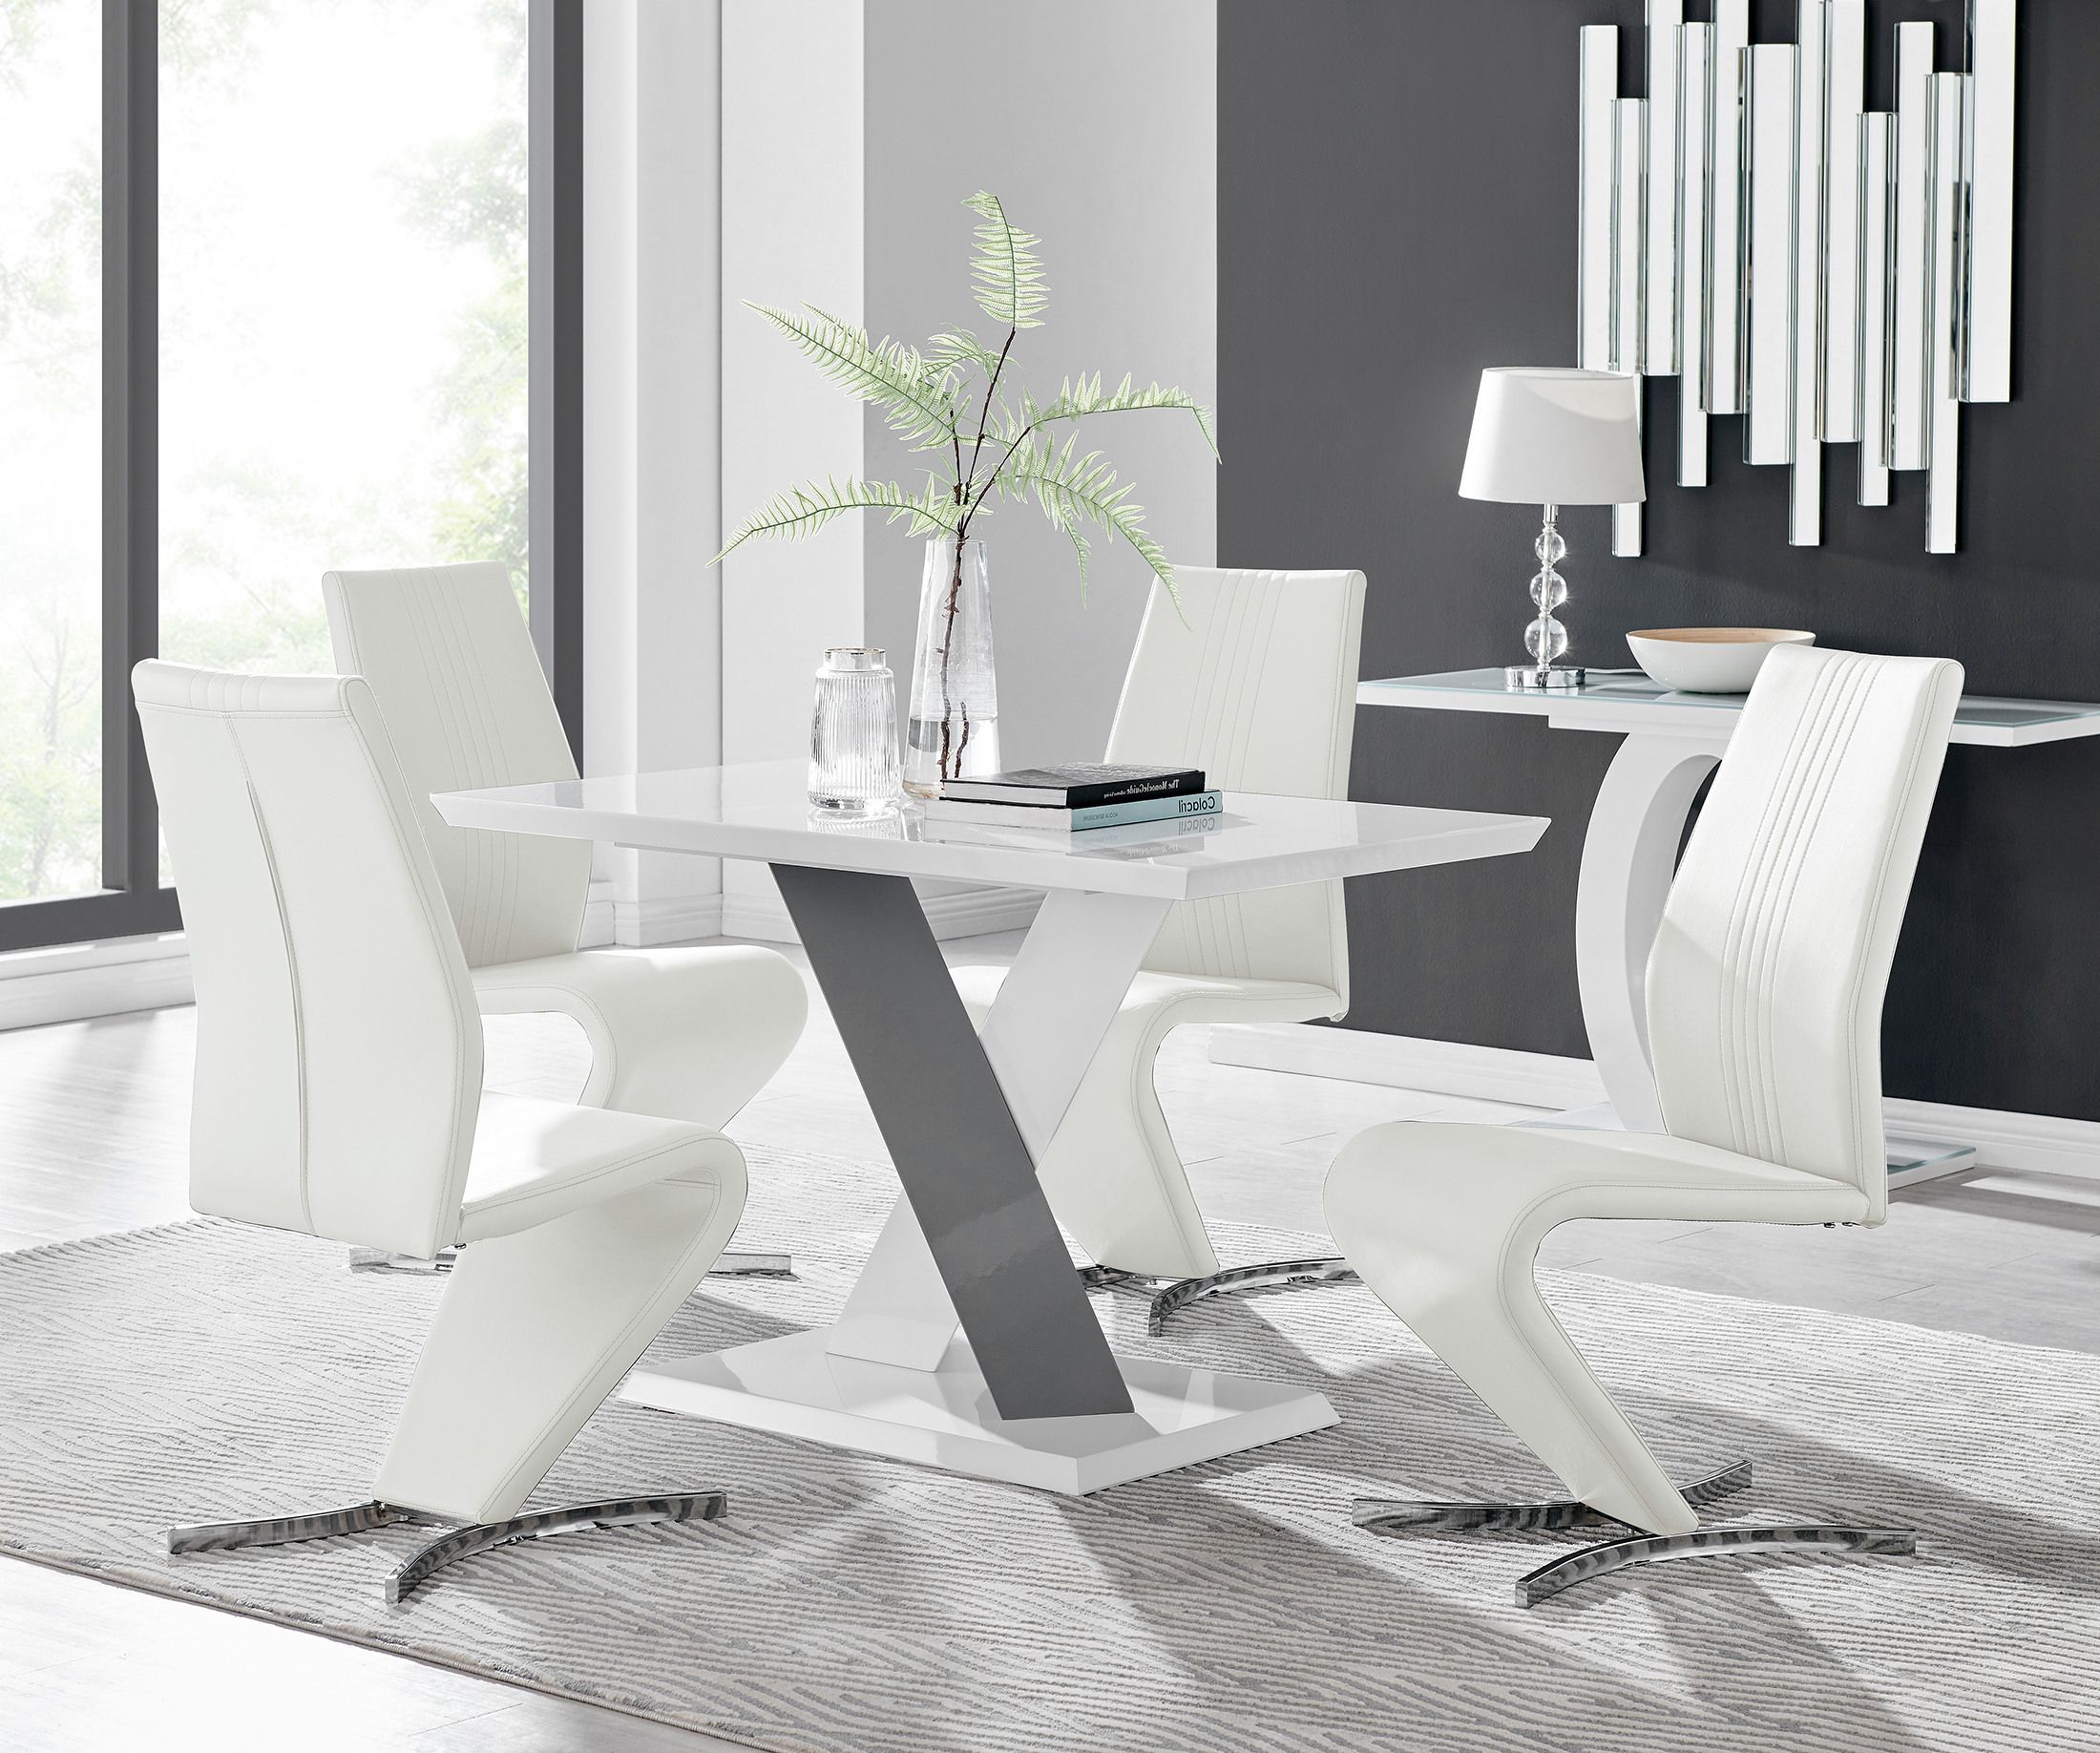 Monza 4 White/grey Dining Table & 4 Willow Chairs Regarding Monza Tv Stands (View 11 of 15)